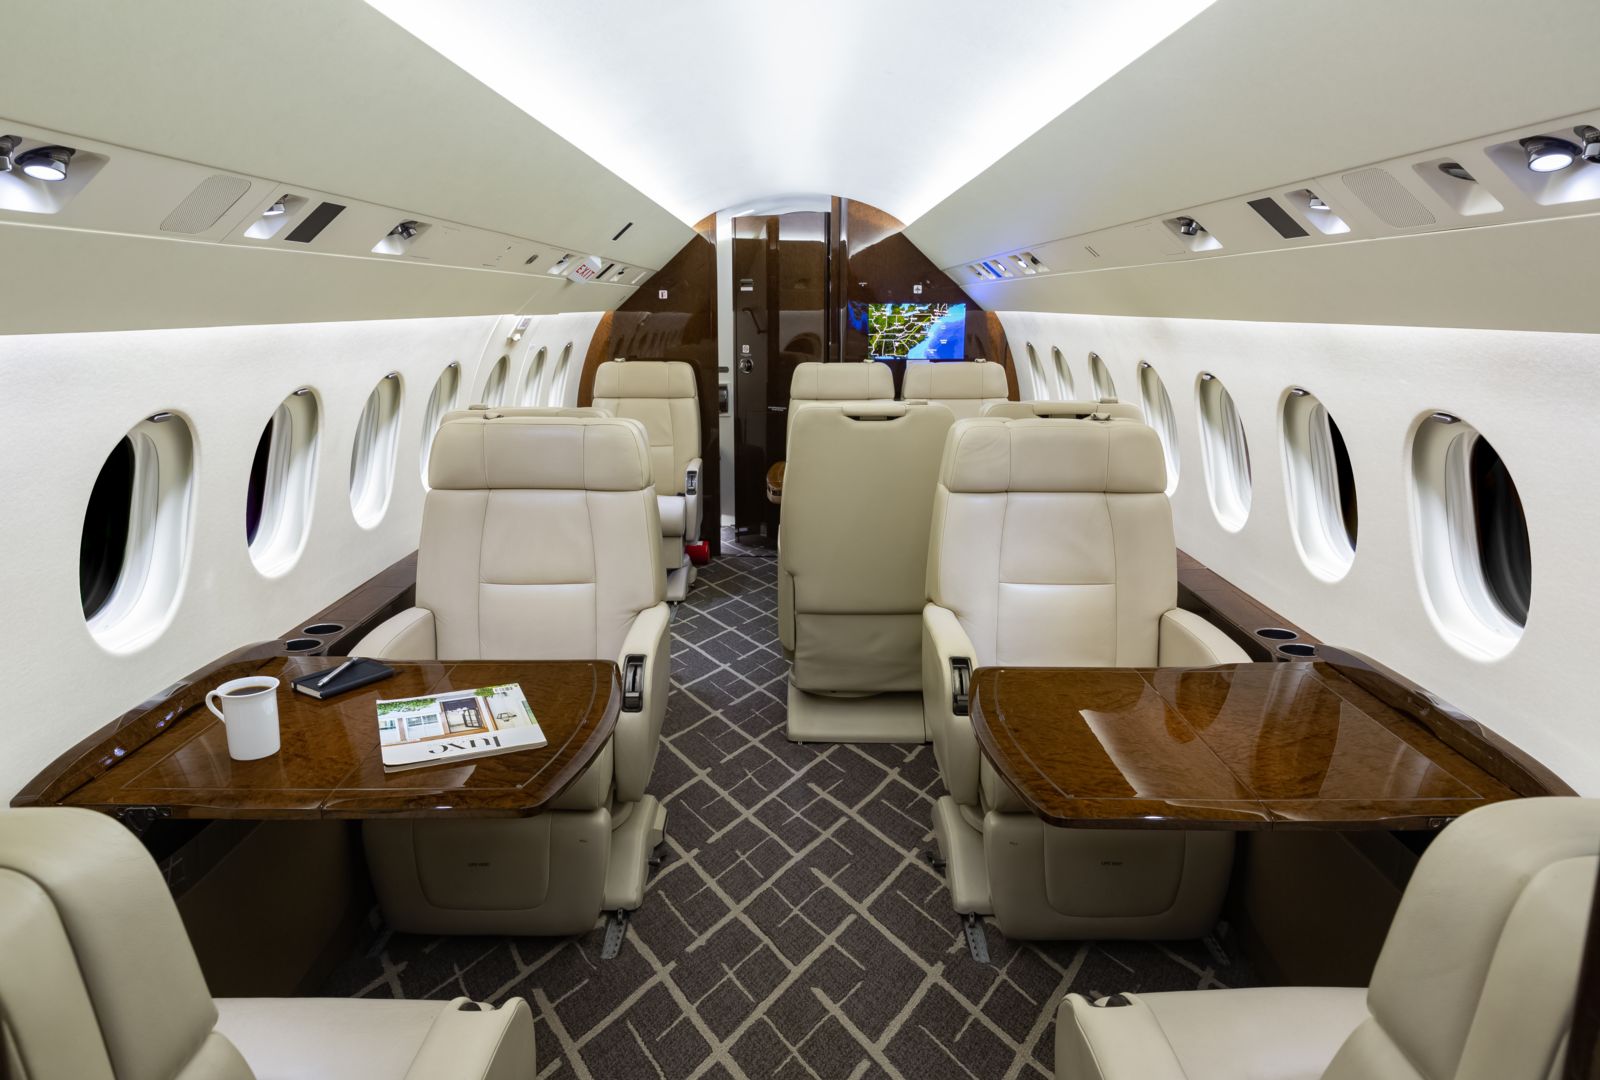 Dassault Falcon 2000LX  S/N 250 for sale | gallery image: /userfiles/files/bfp_8908.jpg